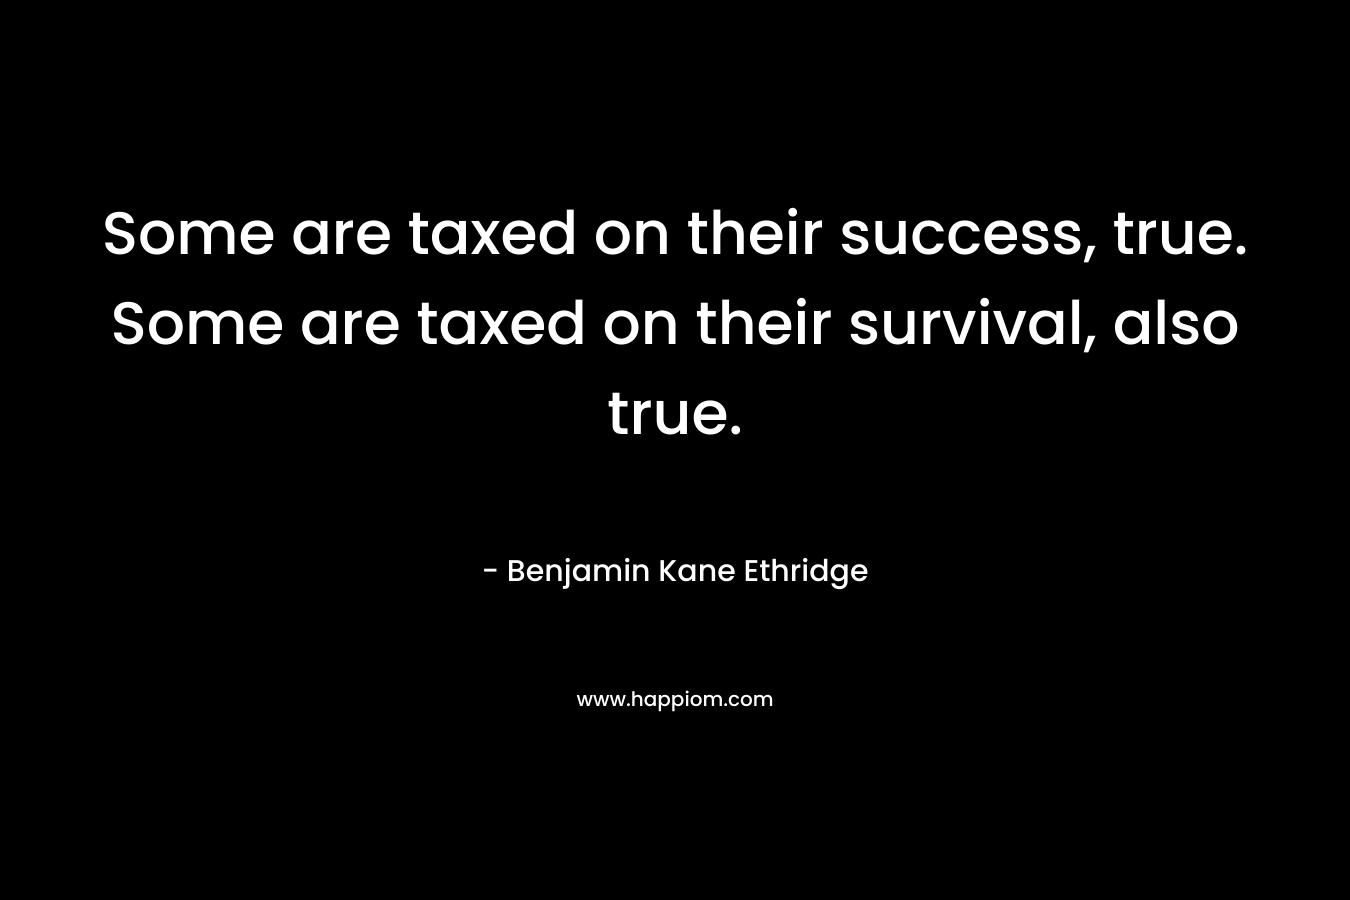 Some are taxed on their success, true. Some are taxed on their survival, also true. – Benjamin Kane Ethridge